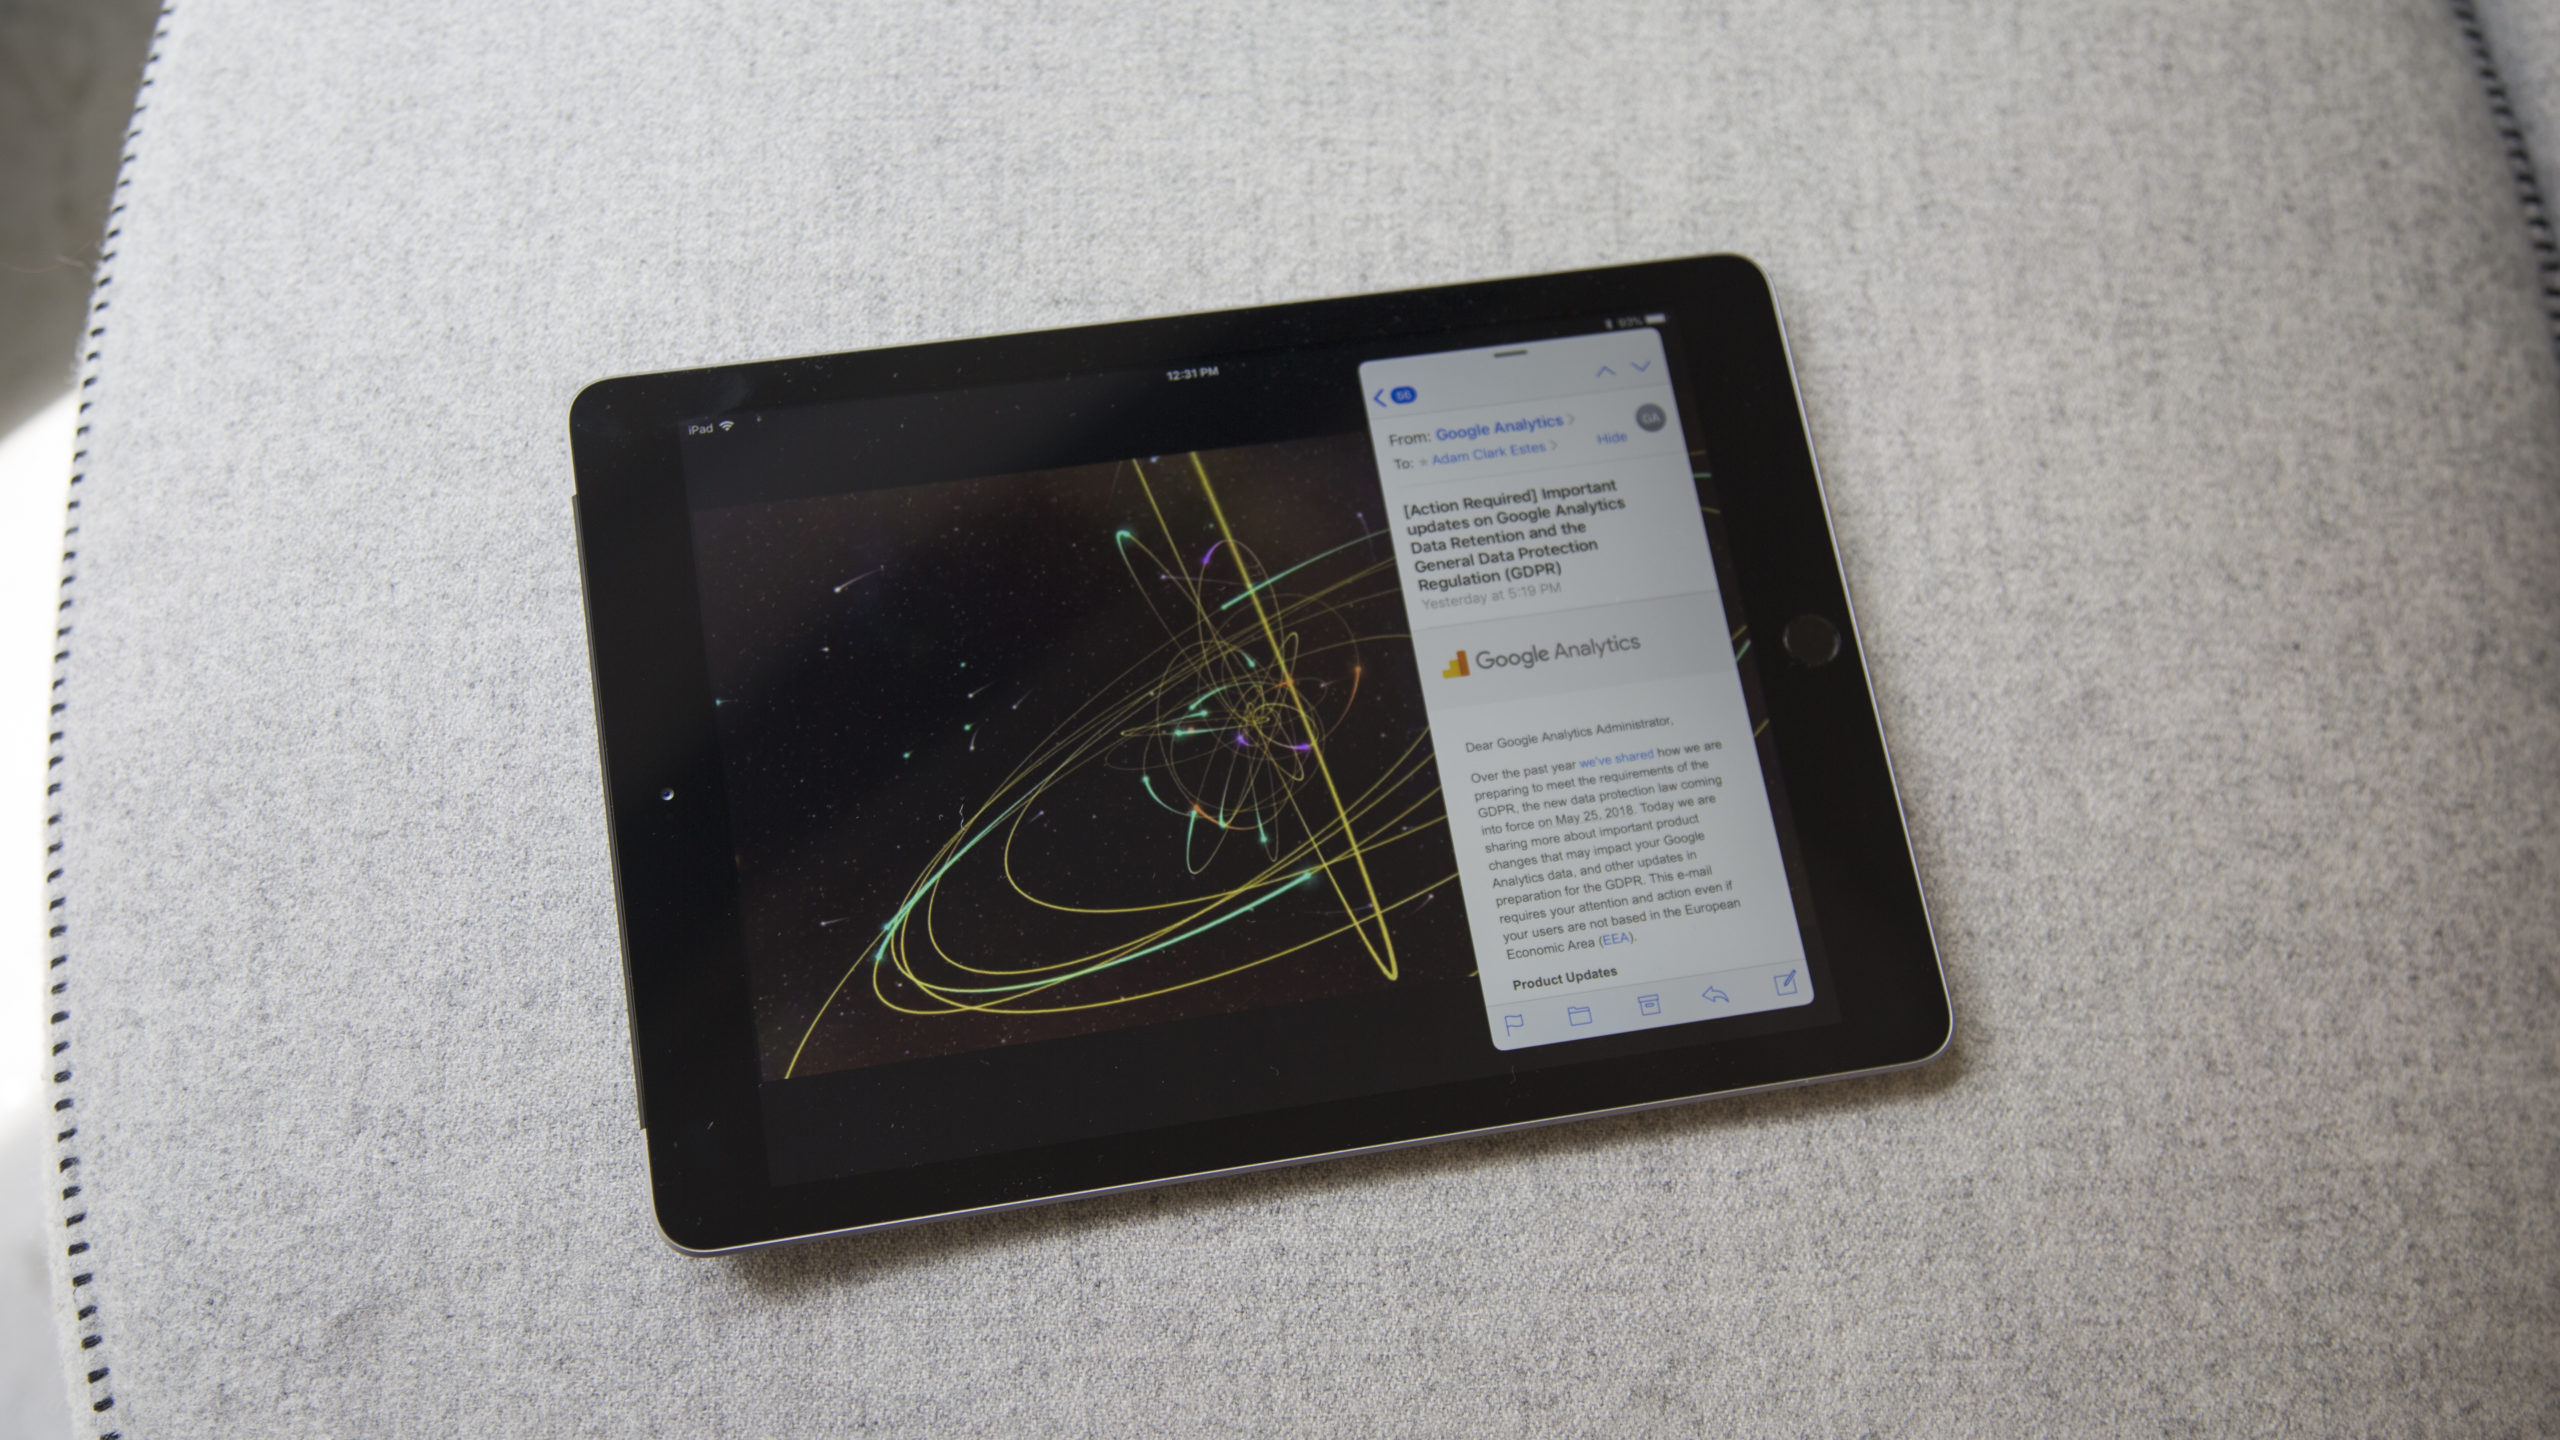 The New Cheap iPad Is All The iPad You Need